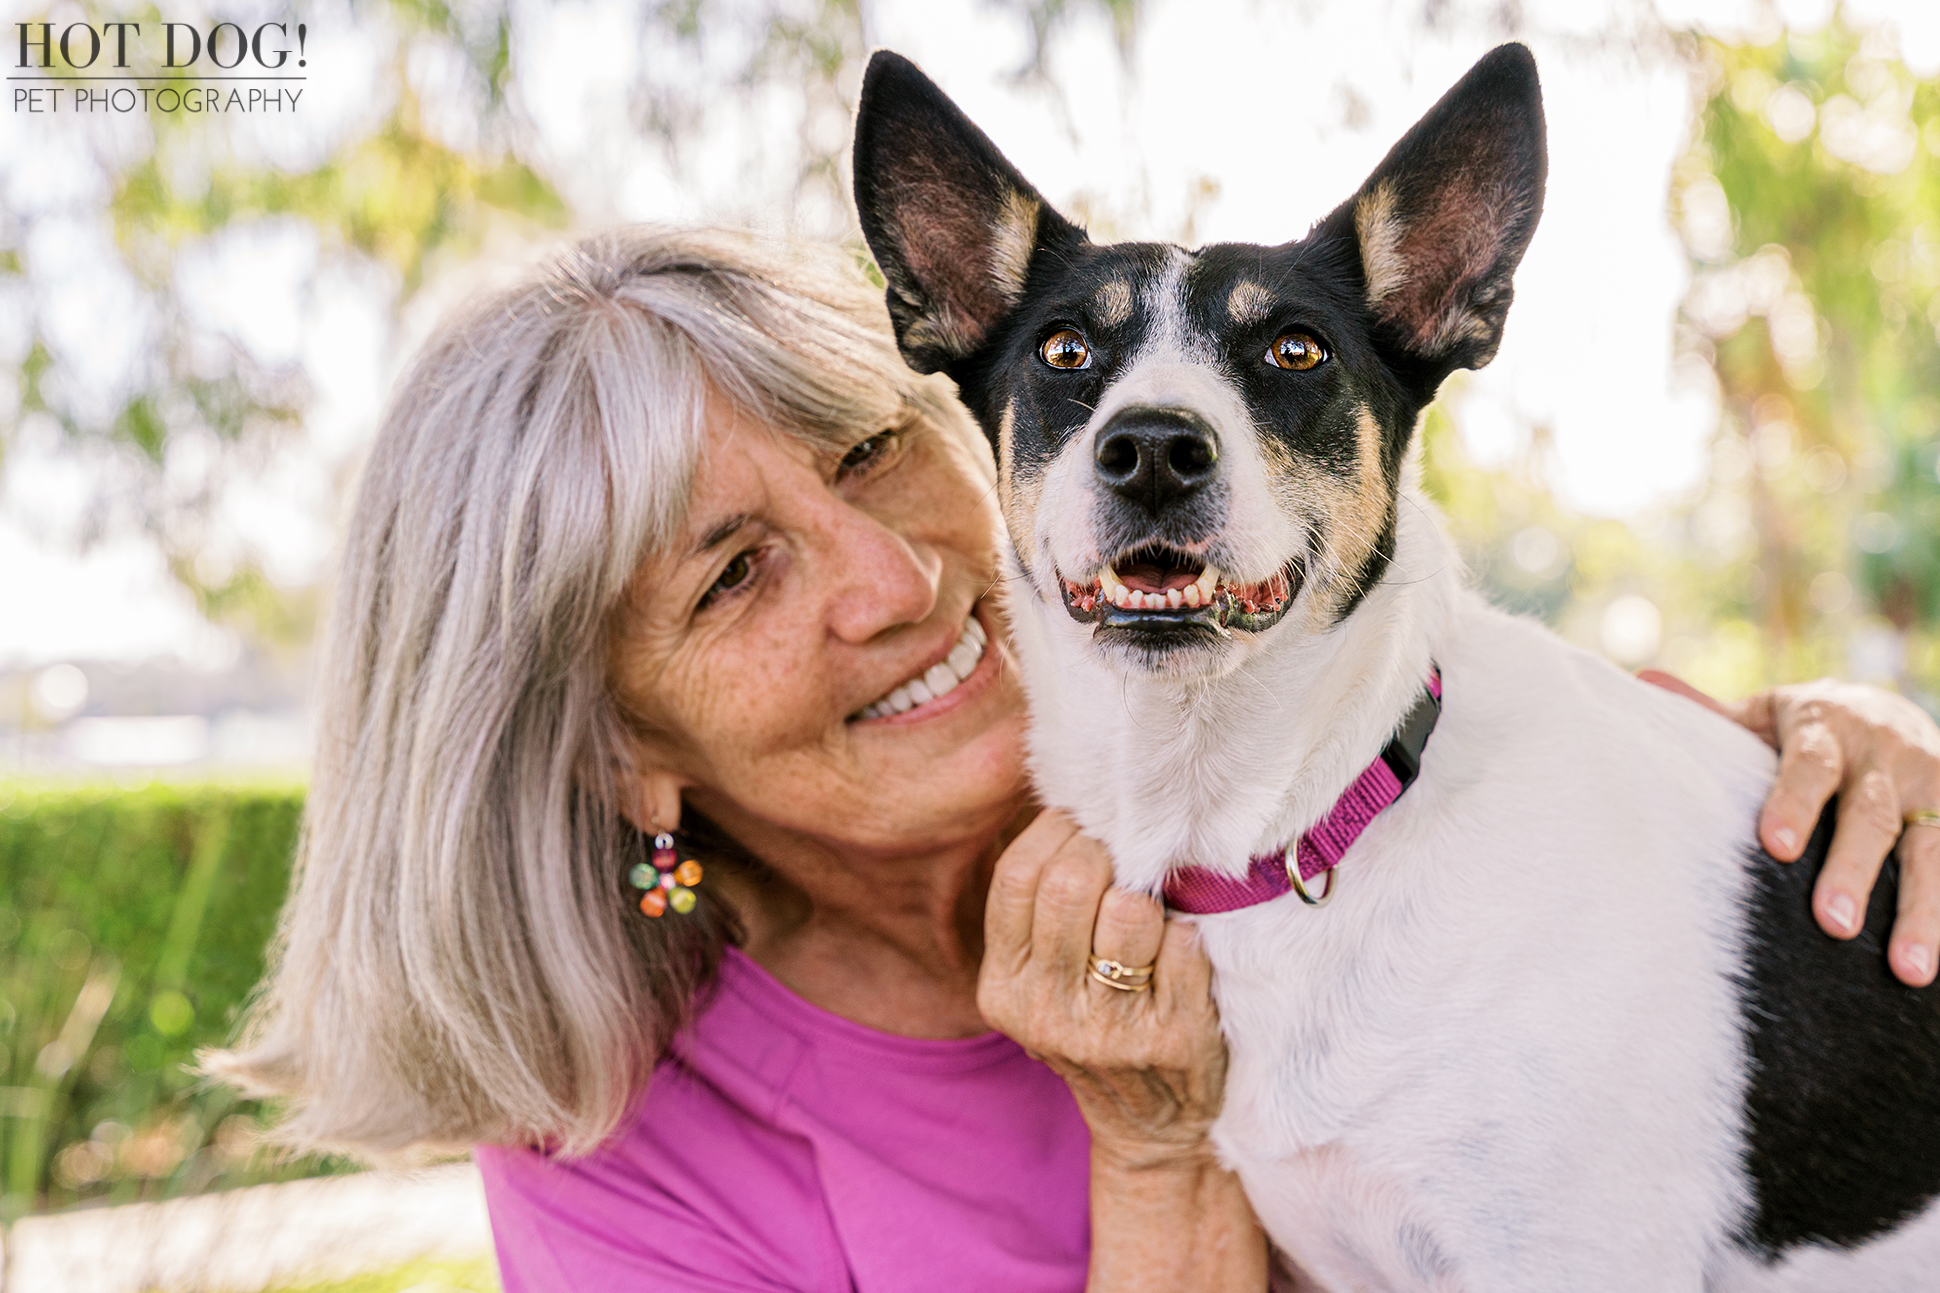 From Shelter to Spotlight: Rescue rat terrier mix Miracle shines in this Orlando pet photography session by Hot Dog! Pet Photography, reminding us of the transformative power of adoption.